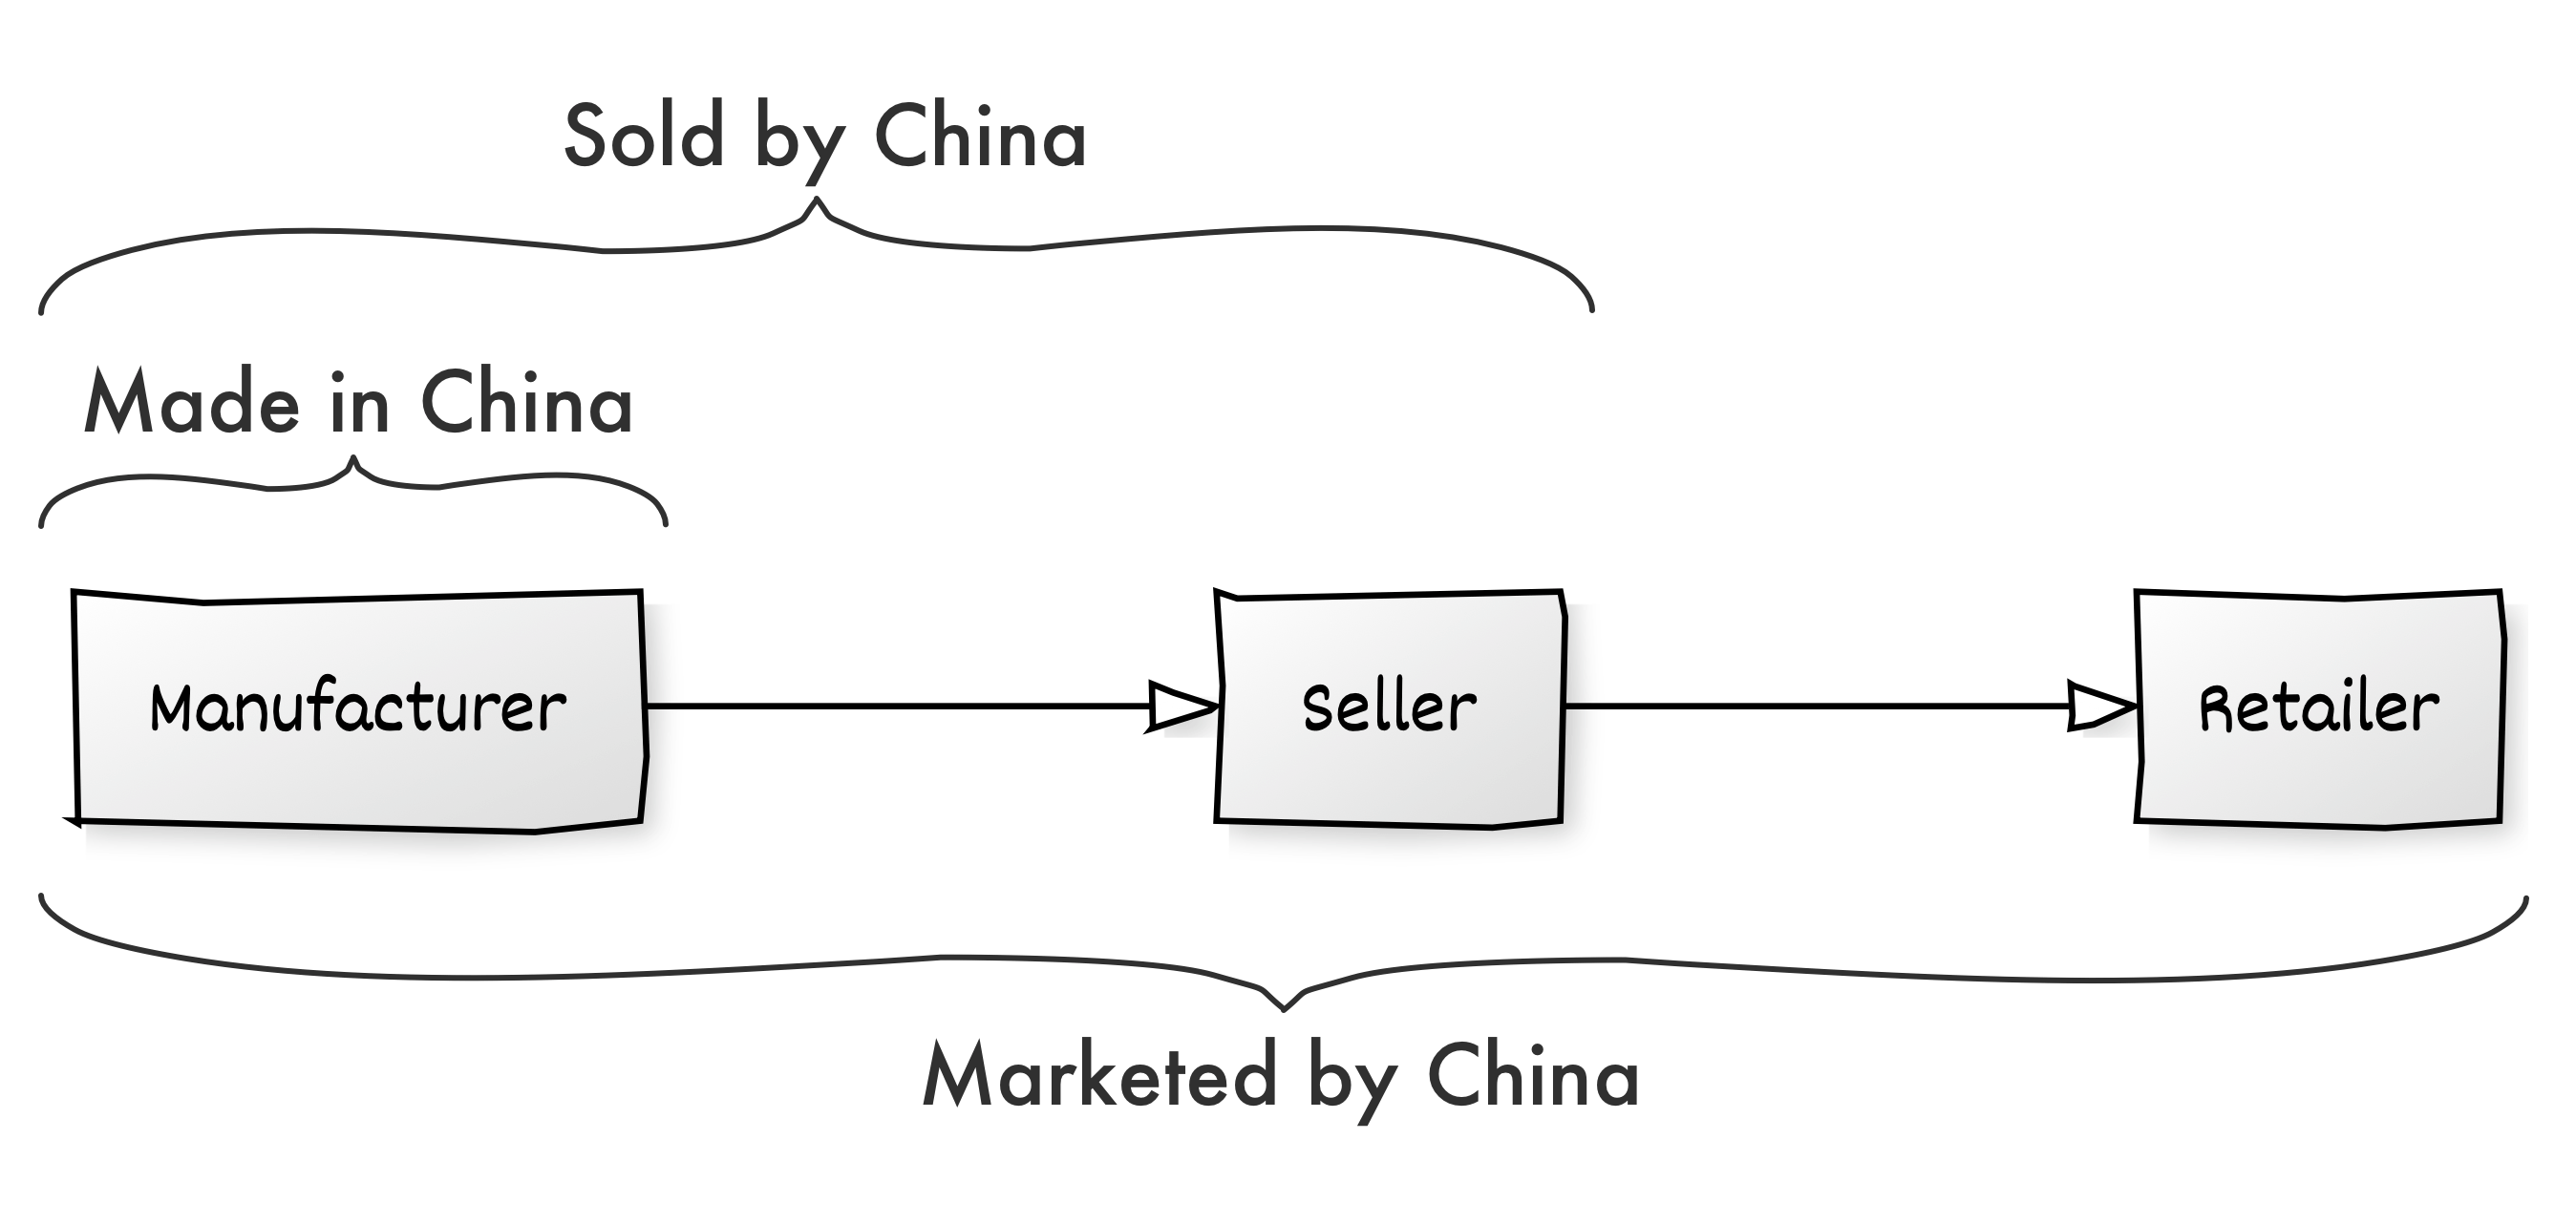 Made, Sold, and Marketed by China